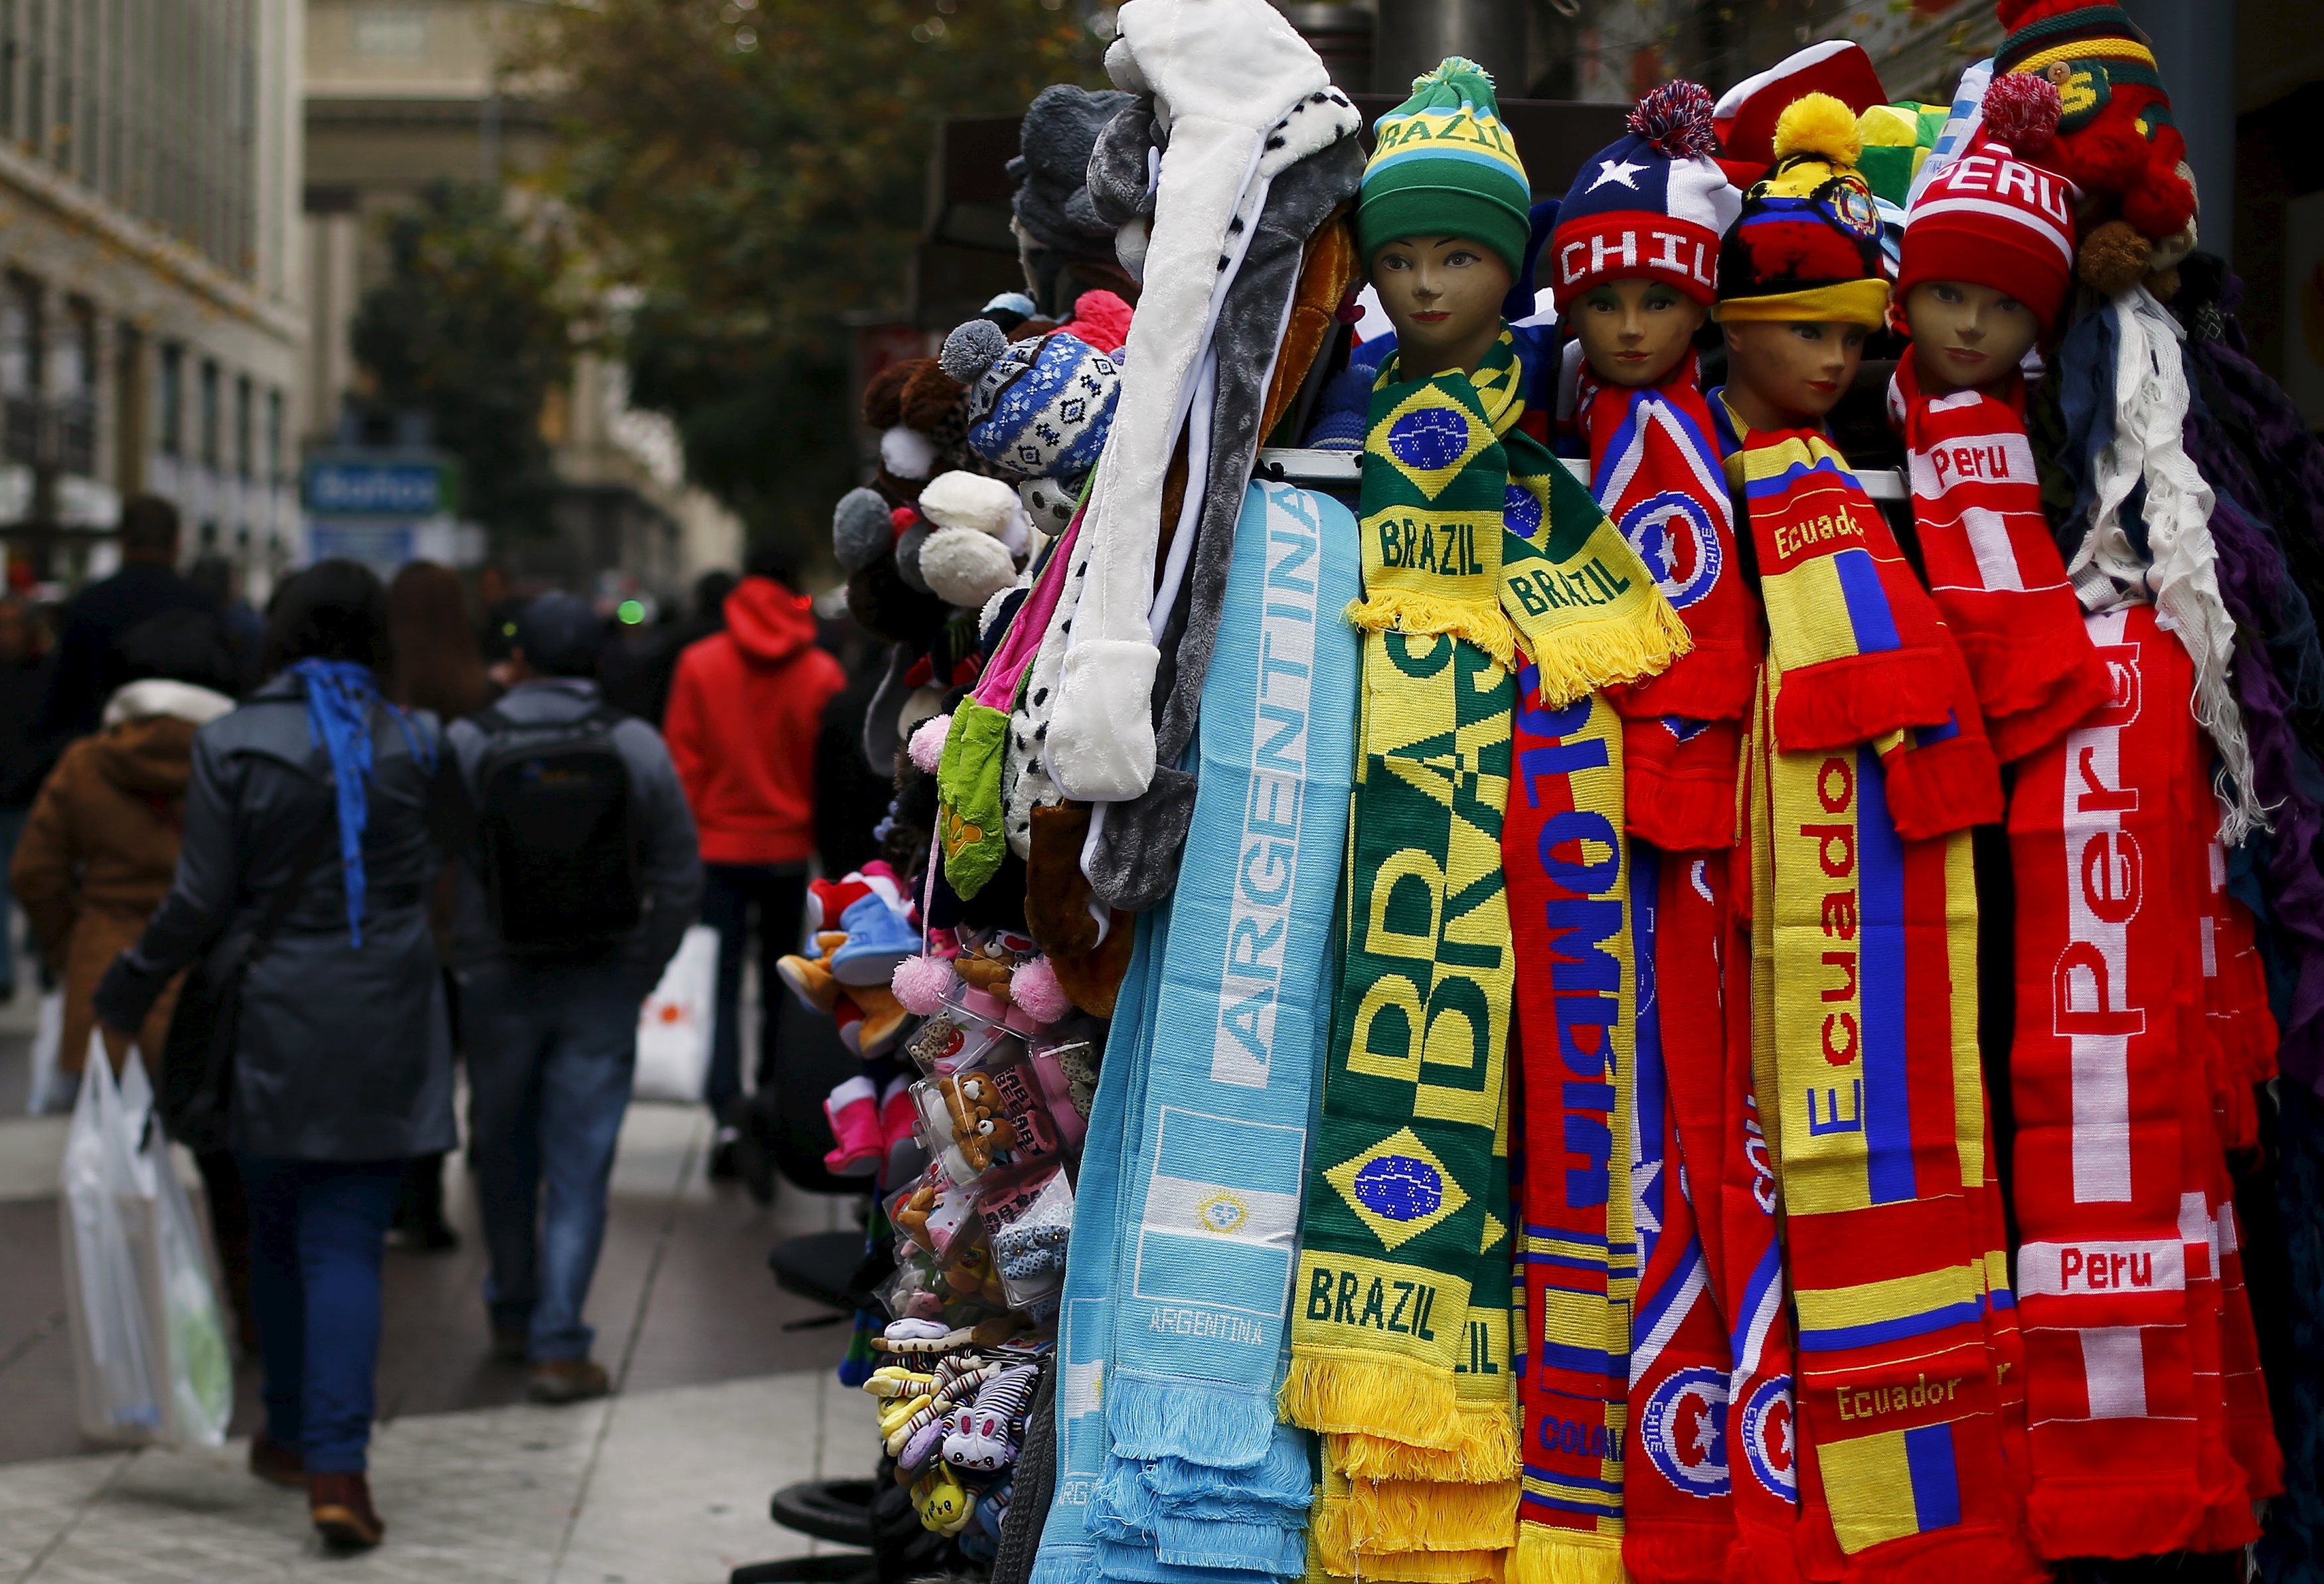 Caps and scarfs displaying the flags of countries which will play in the Copa America are pictured in a street market in Santiago, Chile, June 9, 2015.